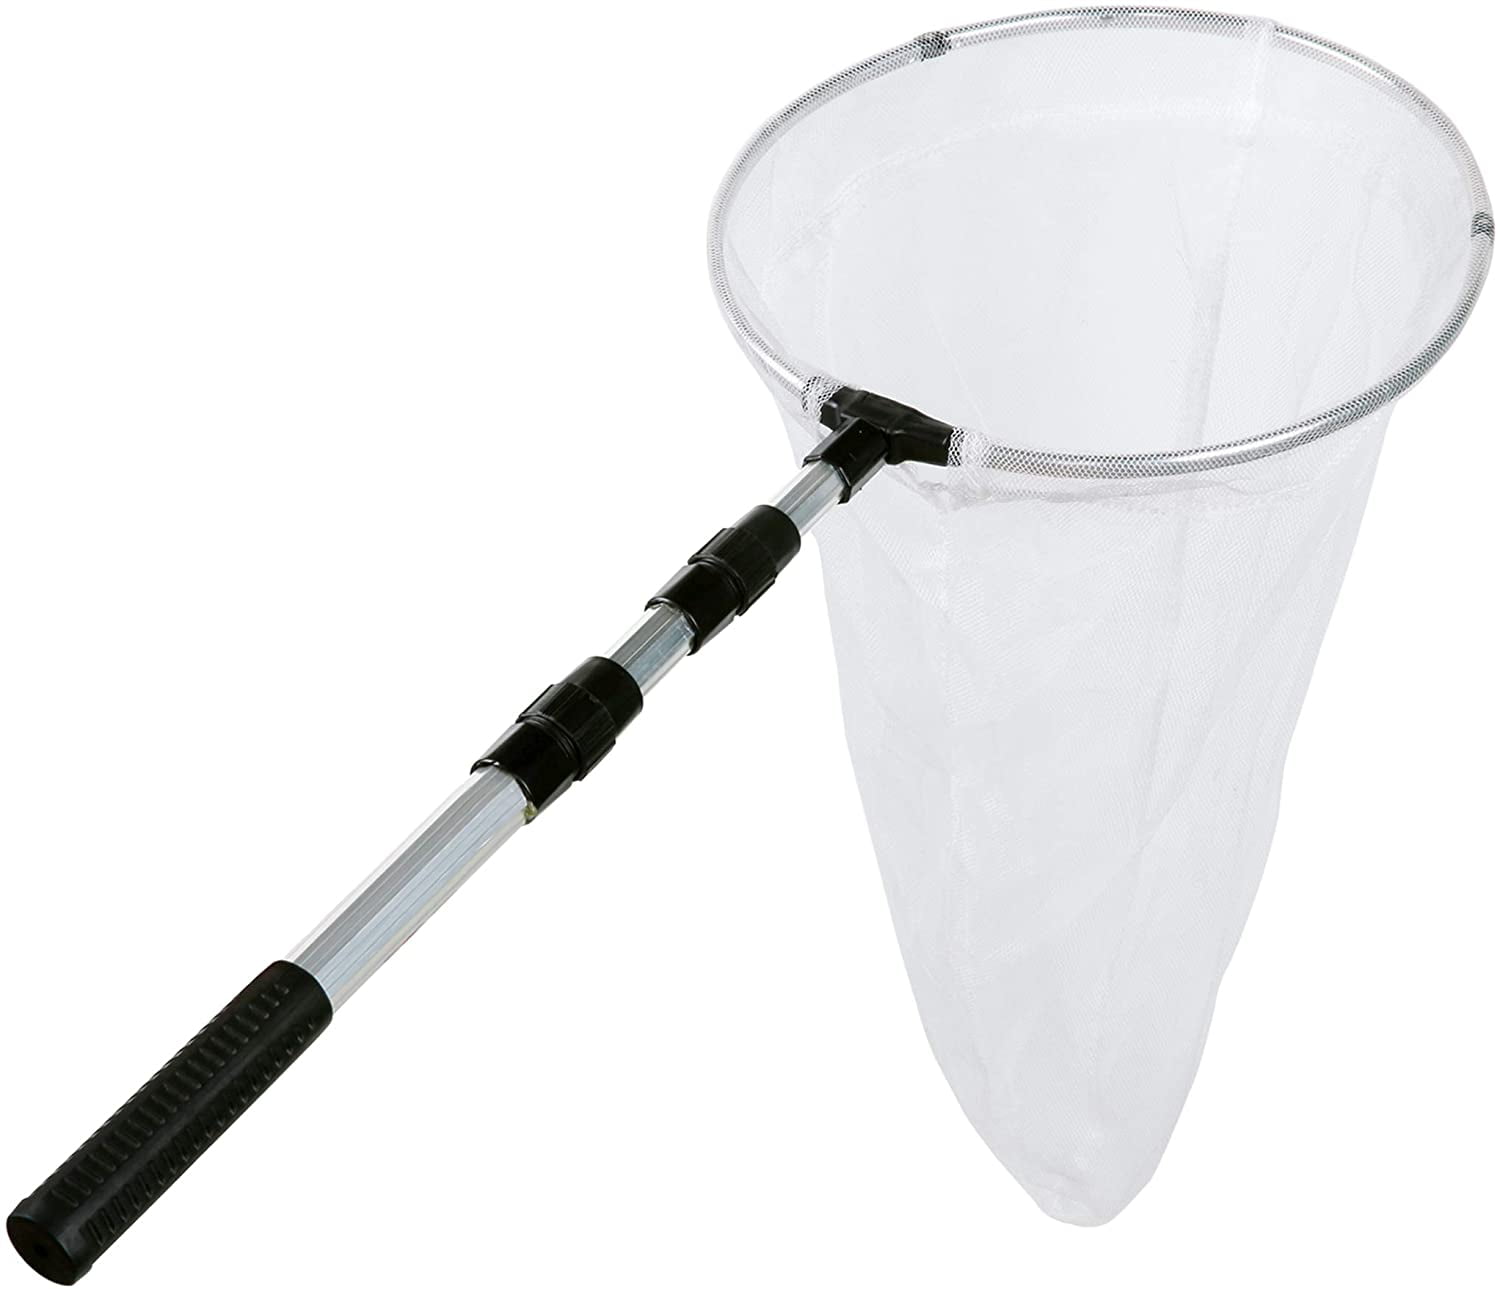 Catching Insect Butterfly Net 14" Ring Extends To 36 inch Dragonfly Bat Fish 